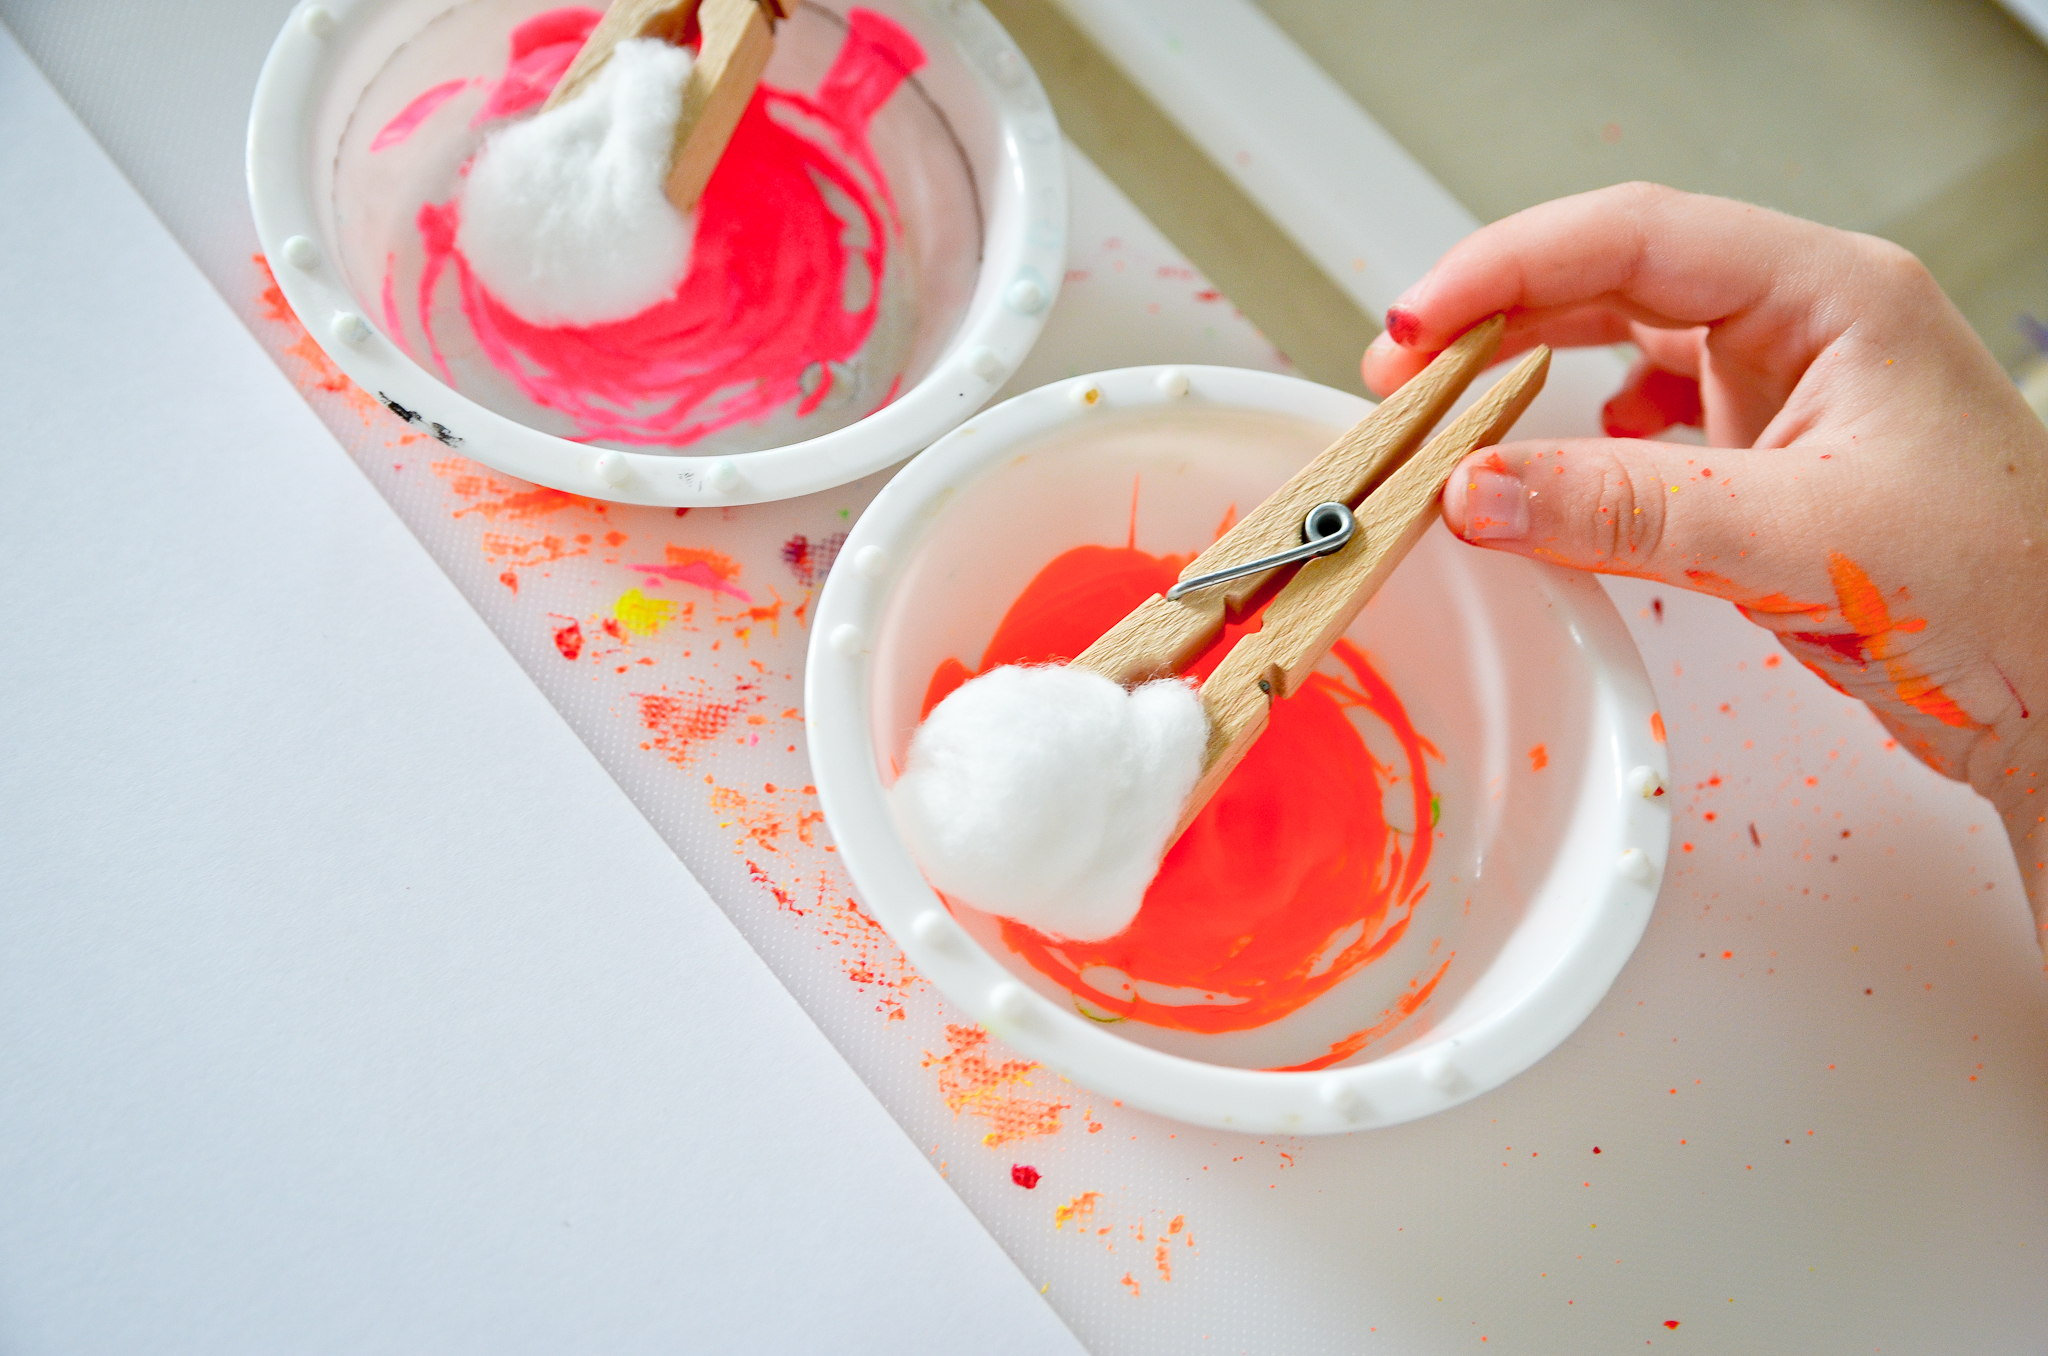 Tips for Painting with Toddlers - Project Nursery